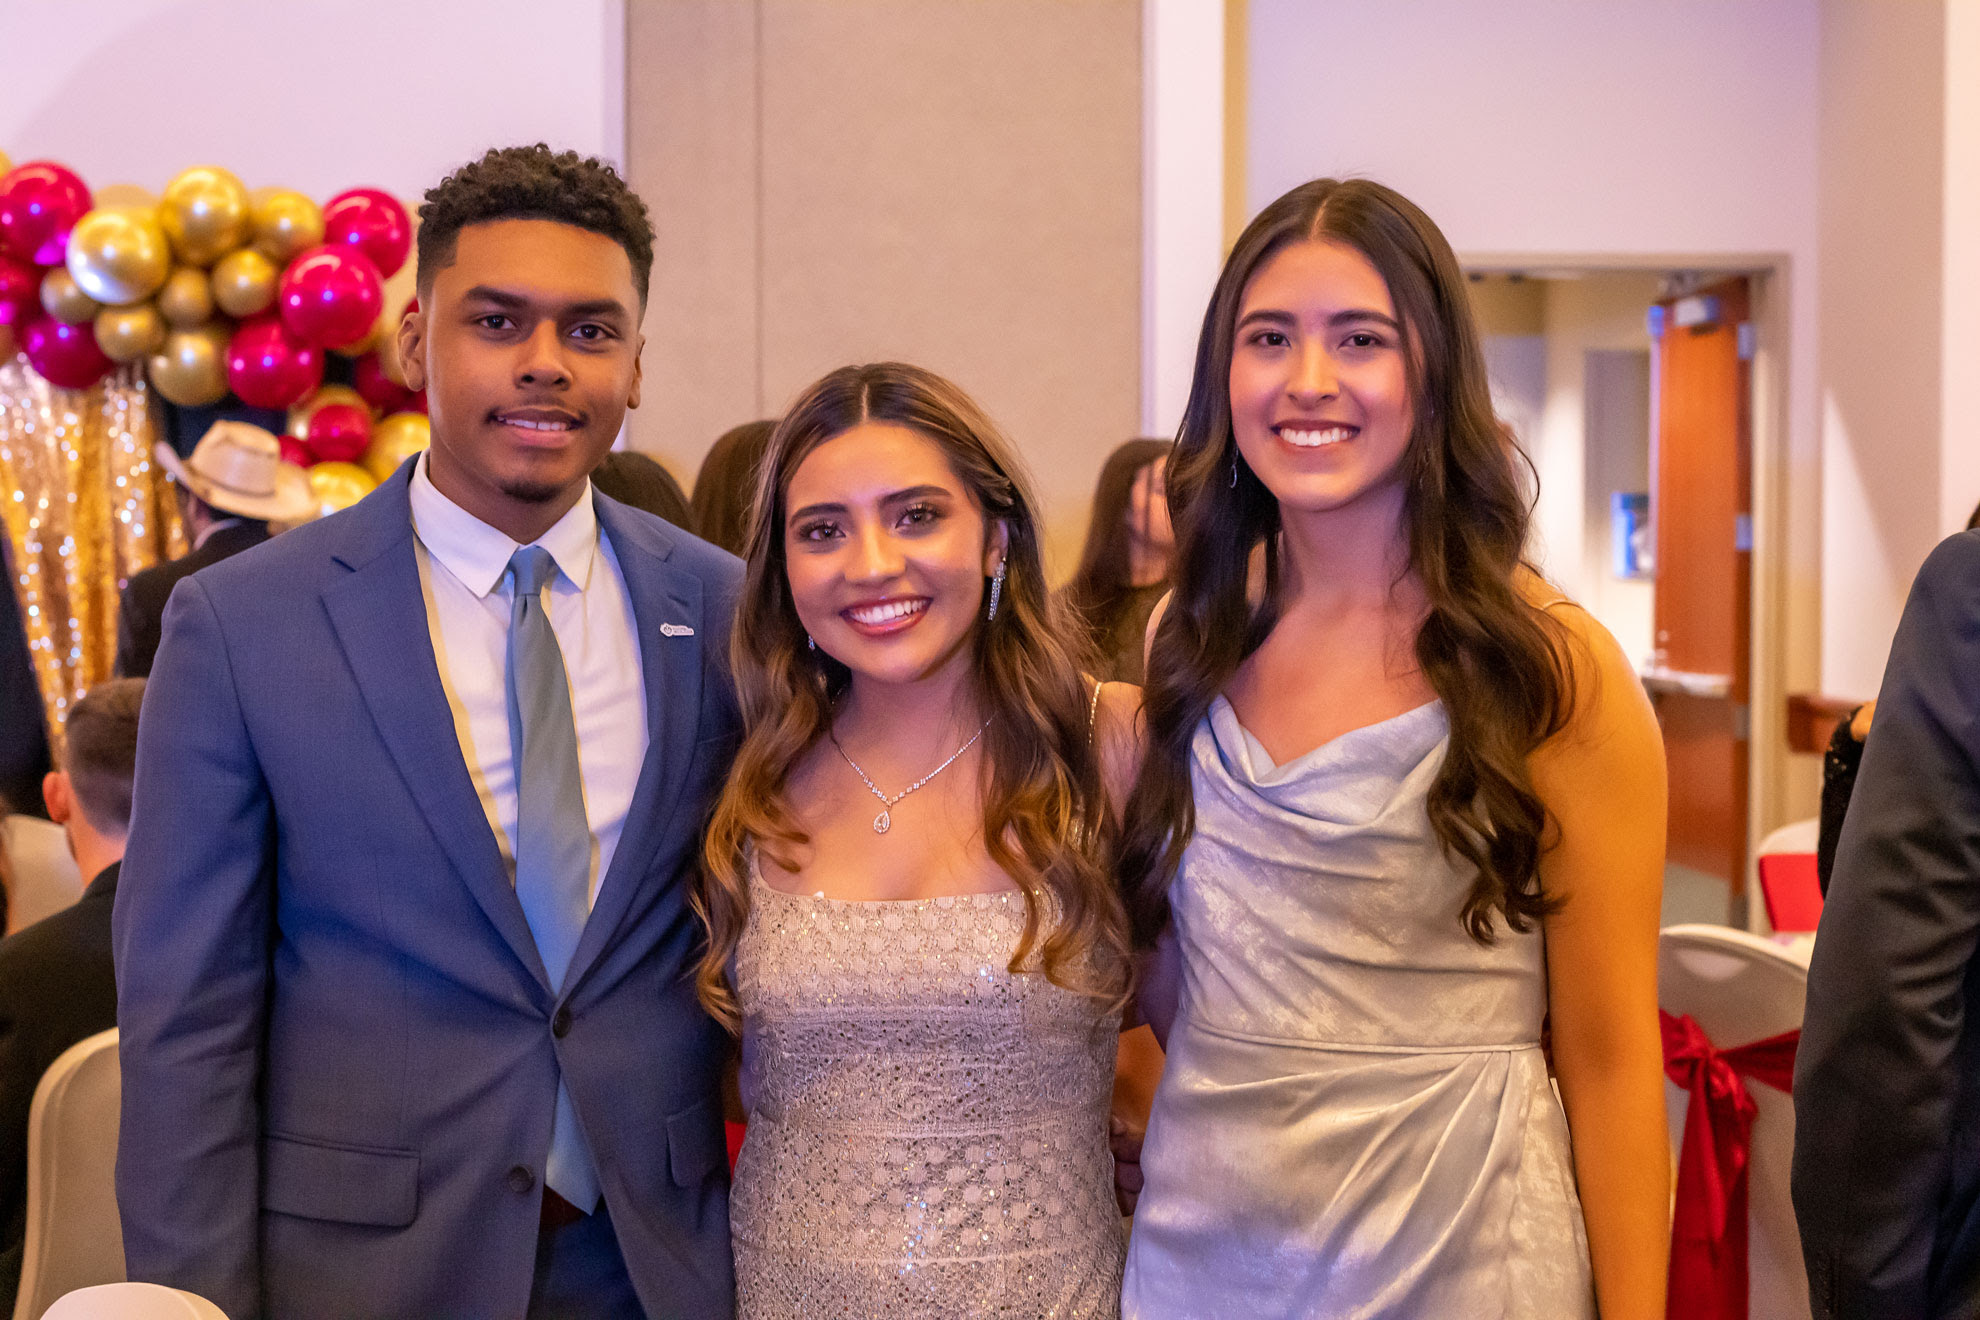 Students from the LatinX Student Union